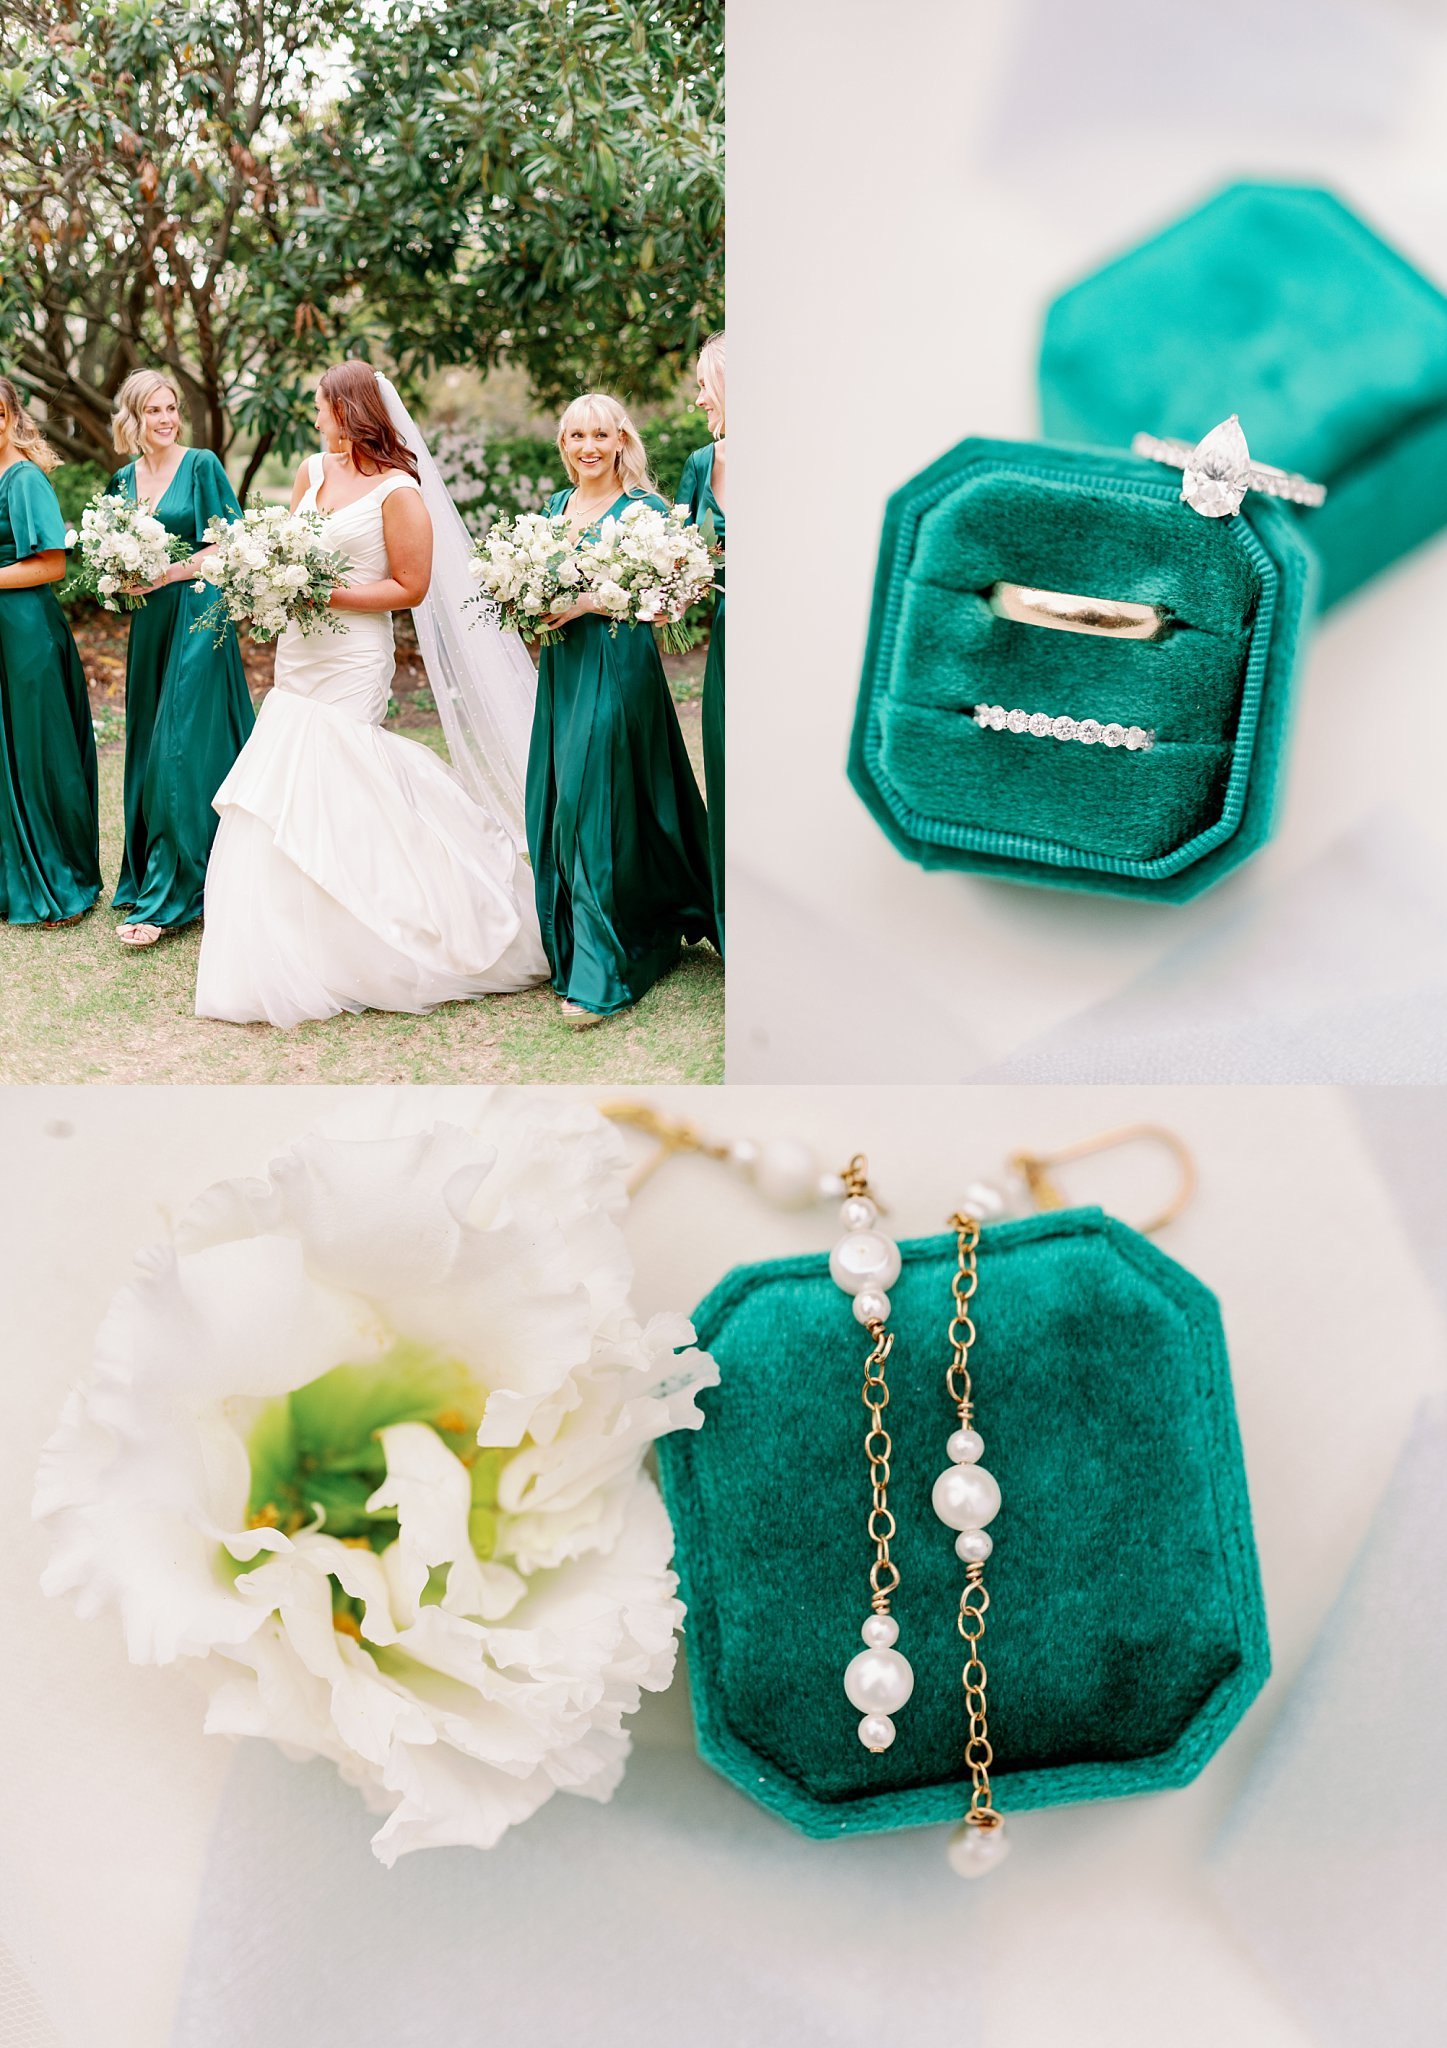 Emerald green and white traditional wedding color scheme in South Carolina wedding. Photographed by Charleston wedding photographer Kayla Nelson.